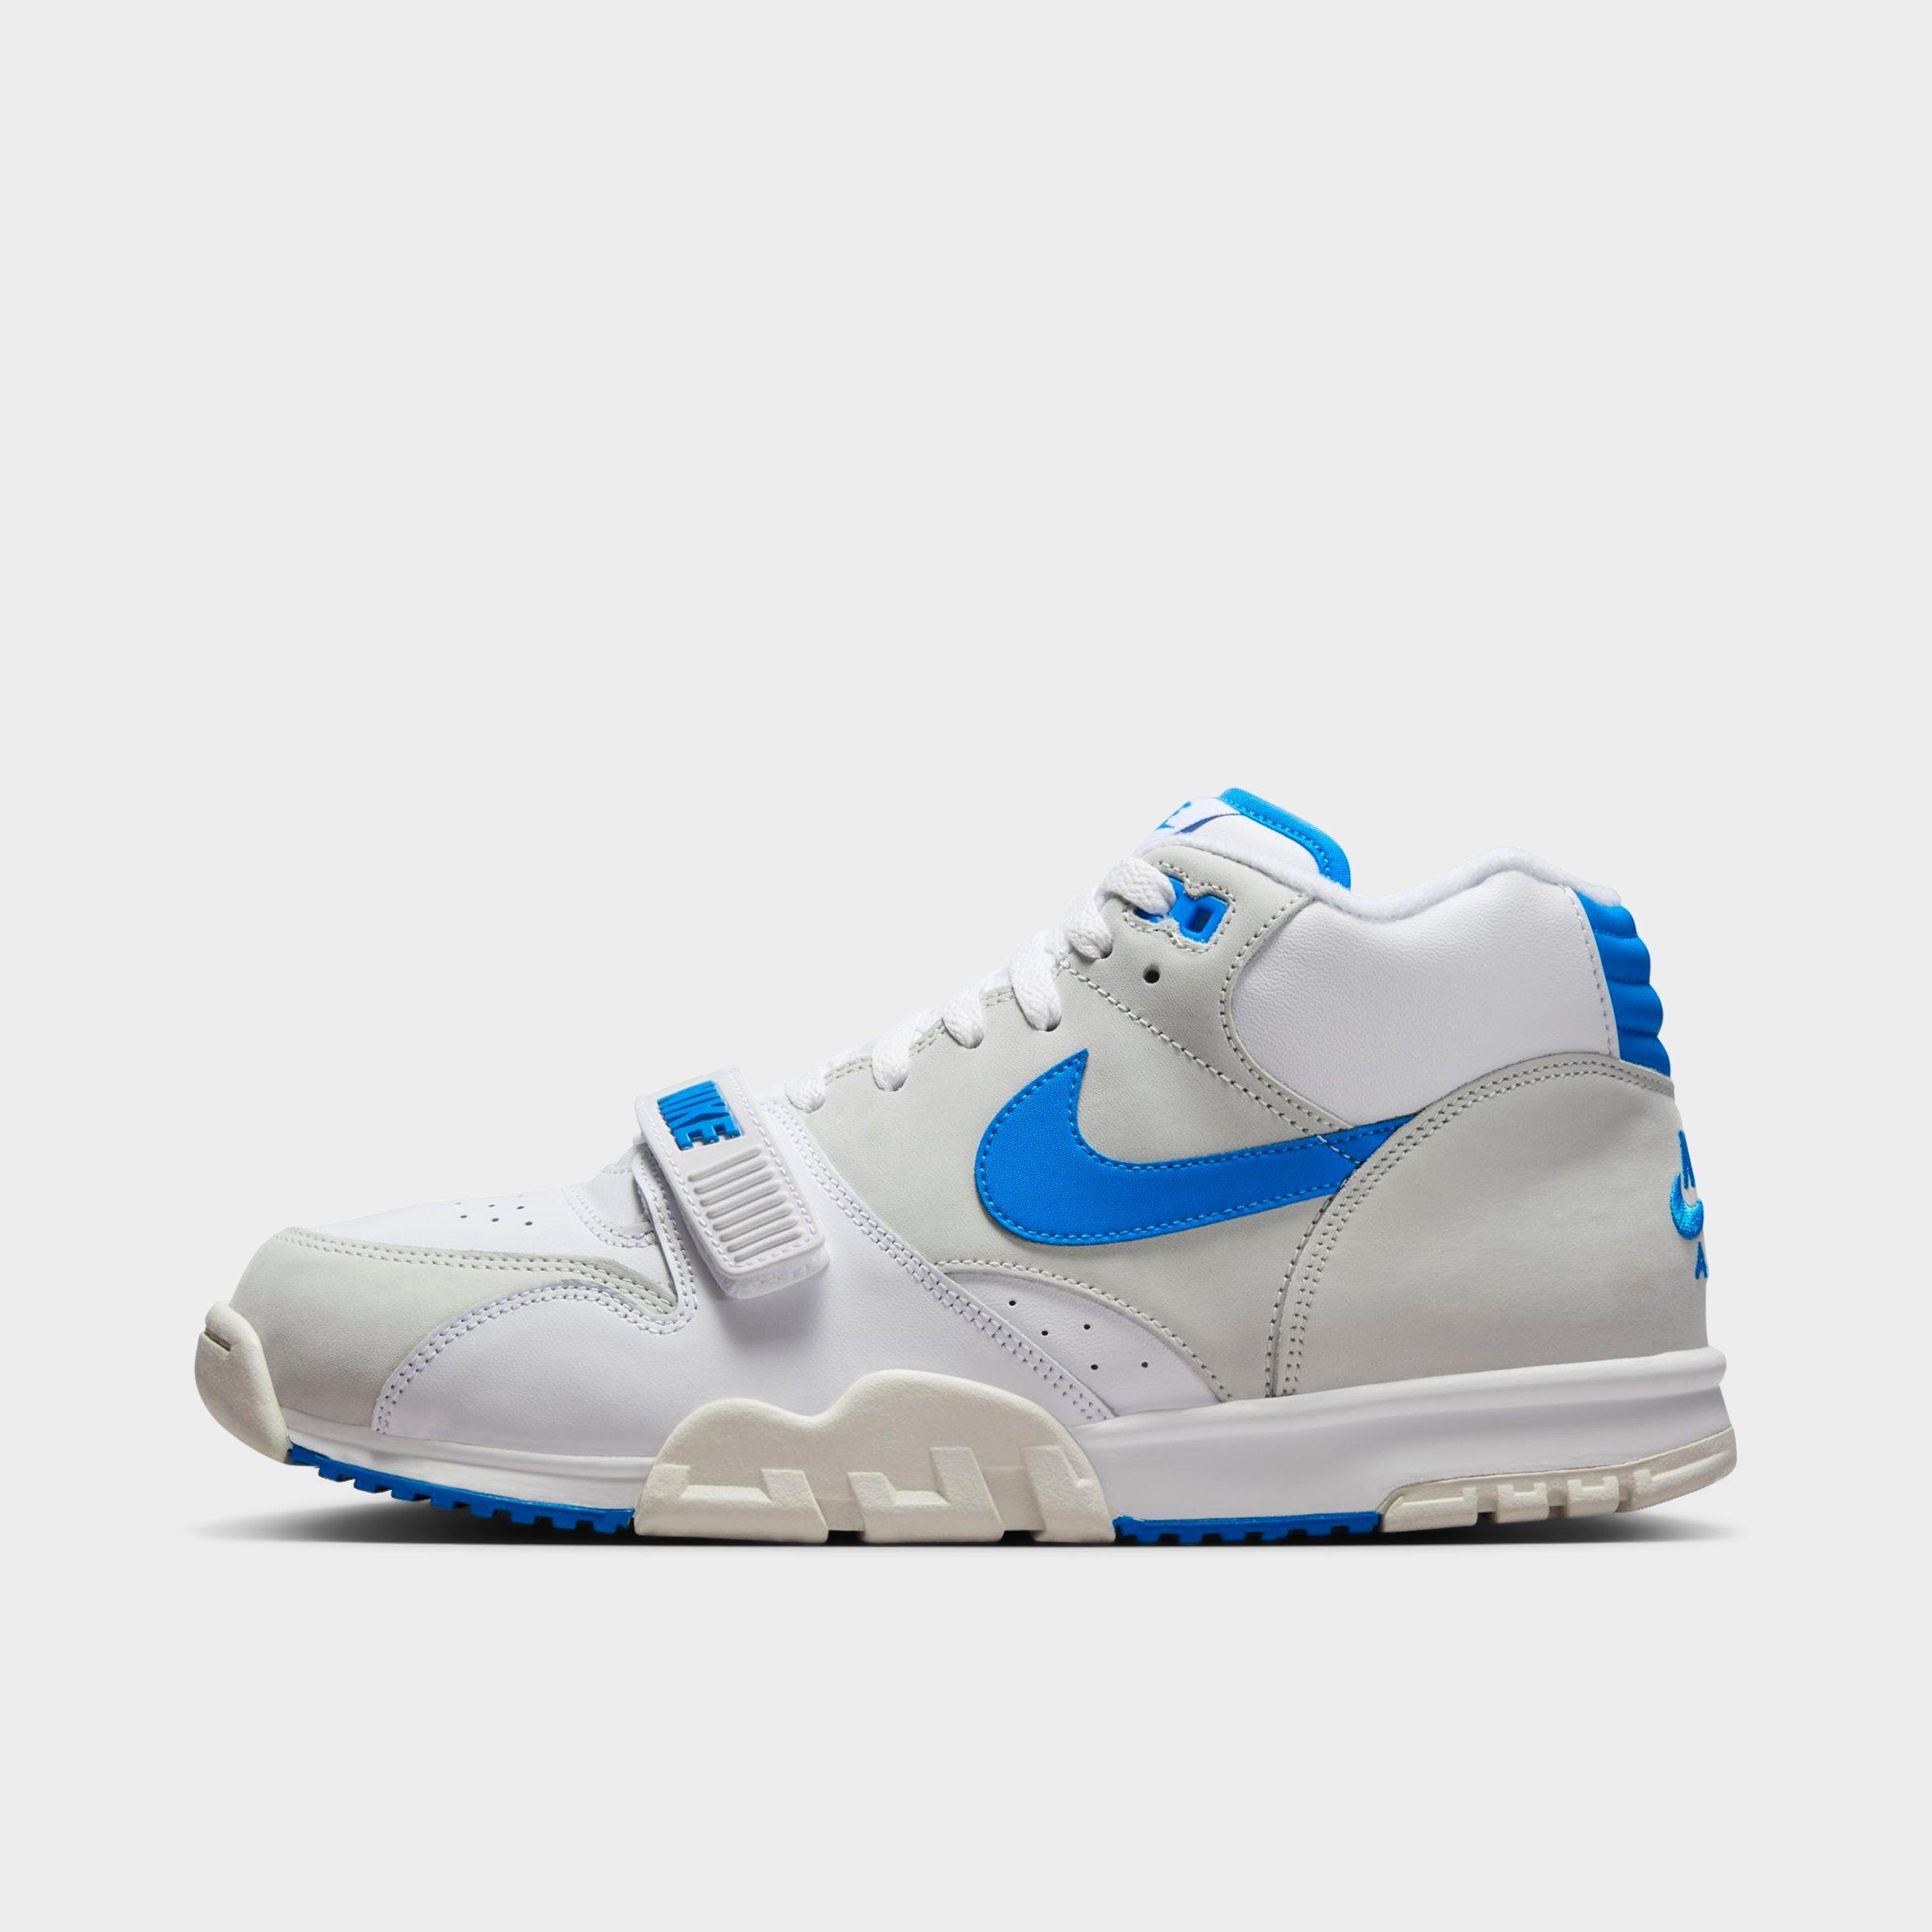 Men's Nike Air Trainer 1 Casual Shoes| JD Sports